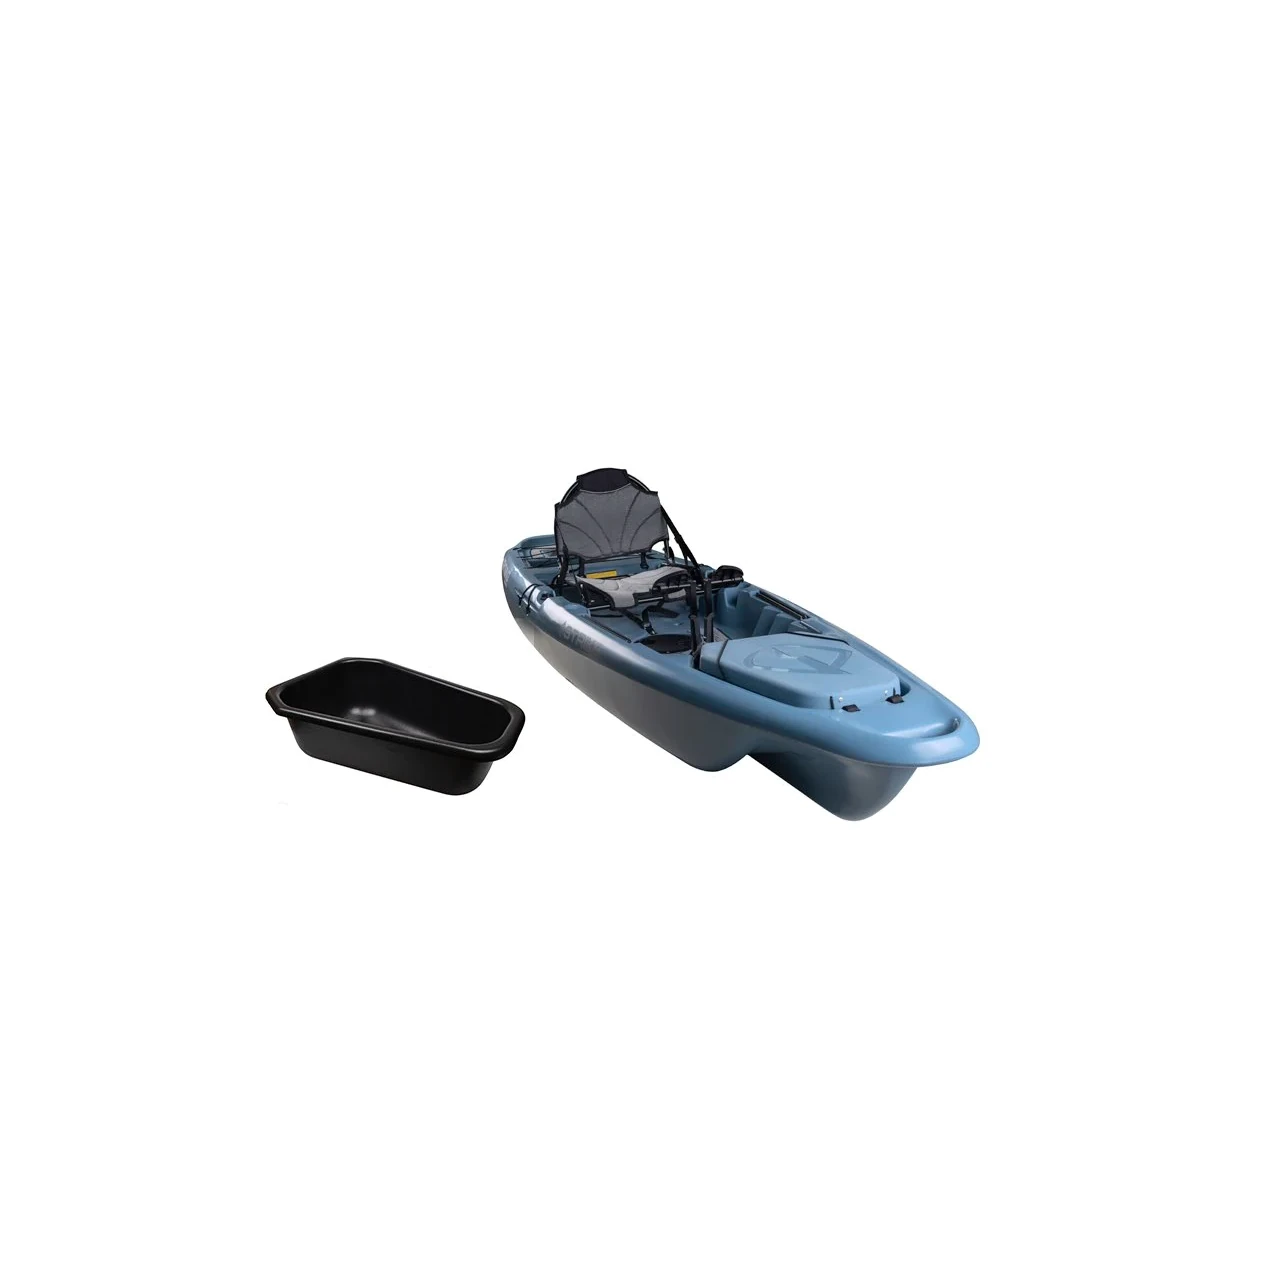 Single 11-Foot Inflatable Fishing Kayak With Pedal Drive System And Seat.